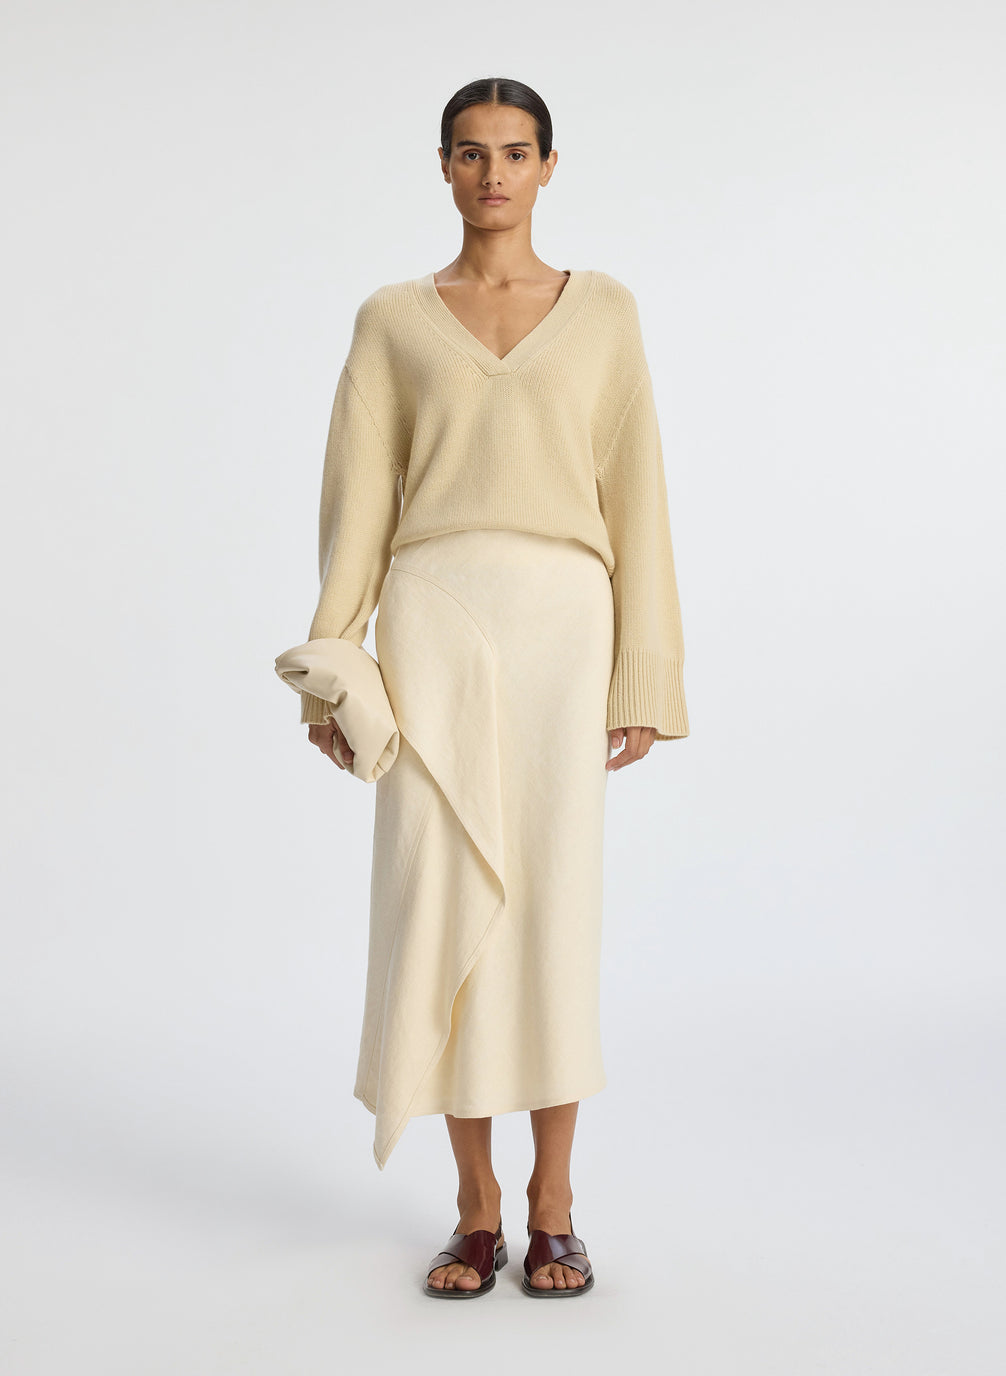 front view of woman wearing beige v neck sweater and cream skirt